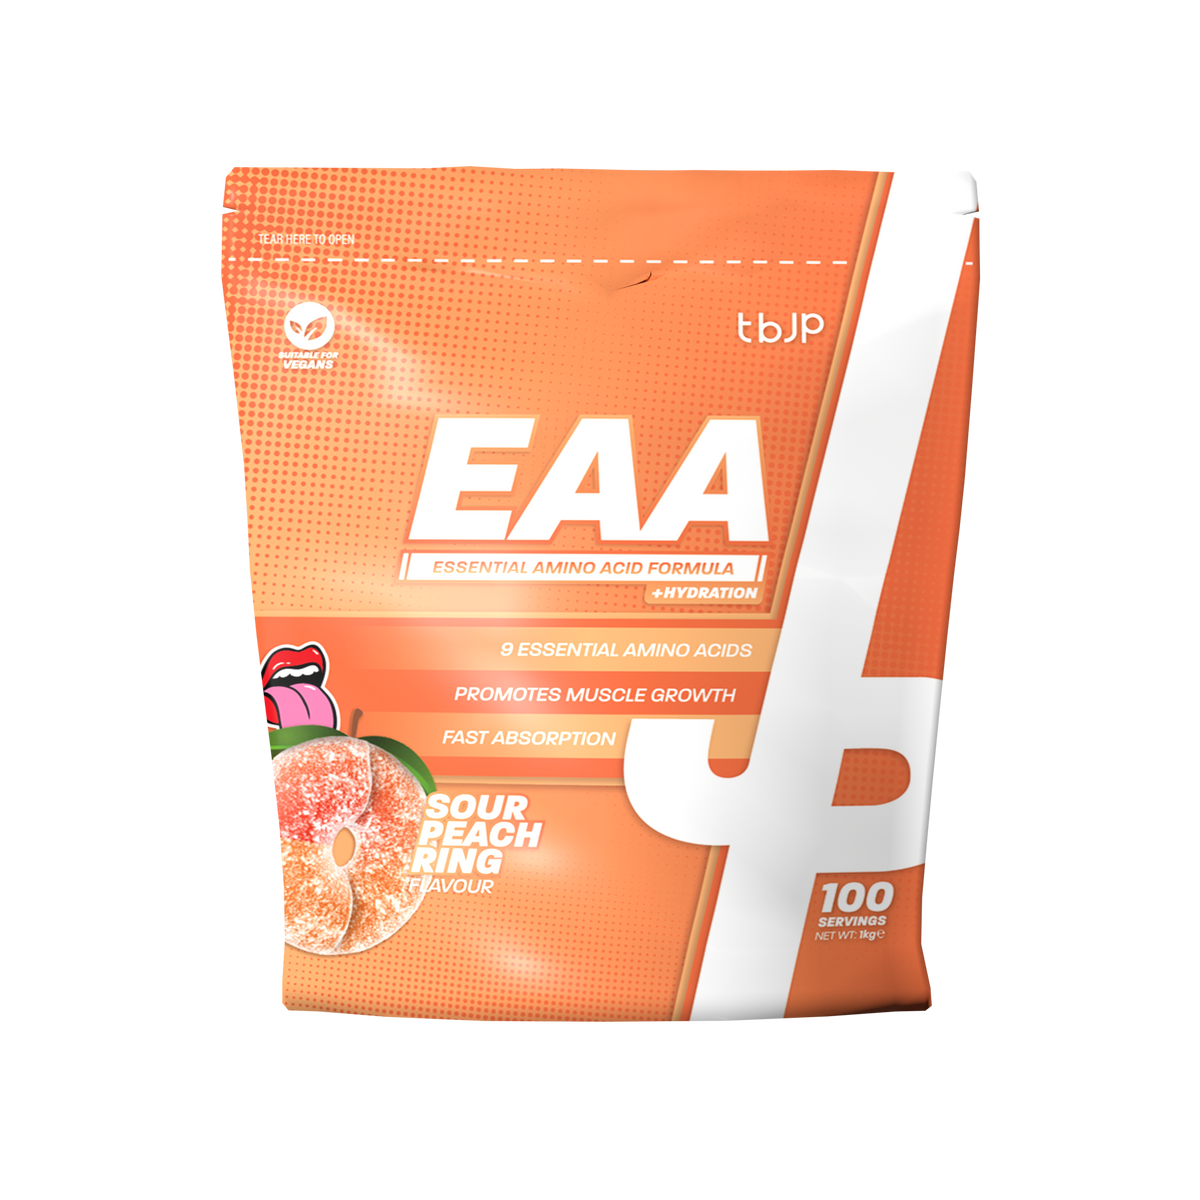 EAA plus hydration - 2 SIZES AVAILABLE! – tbJP